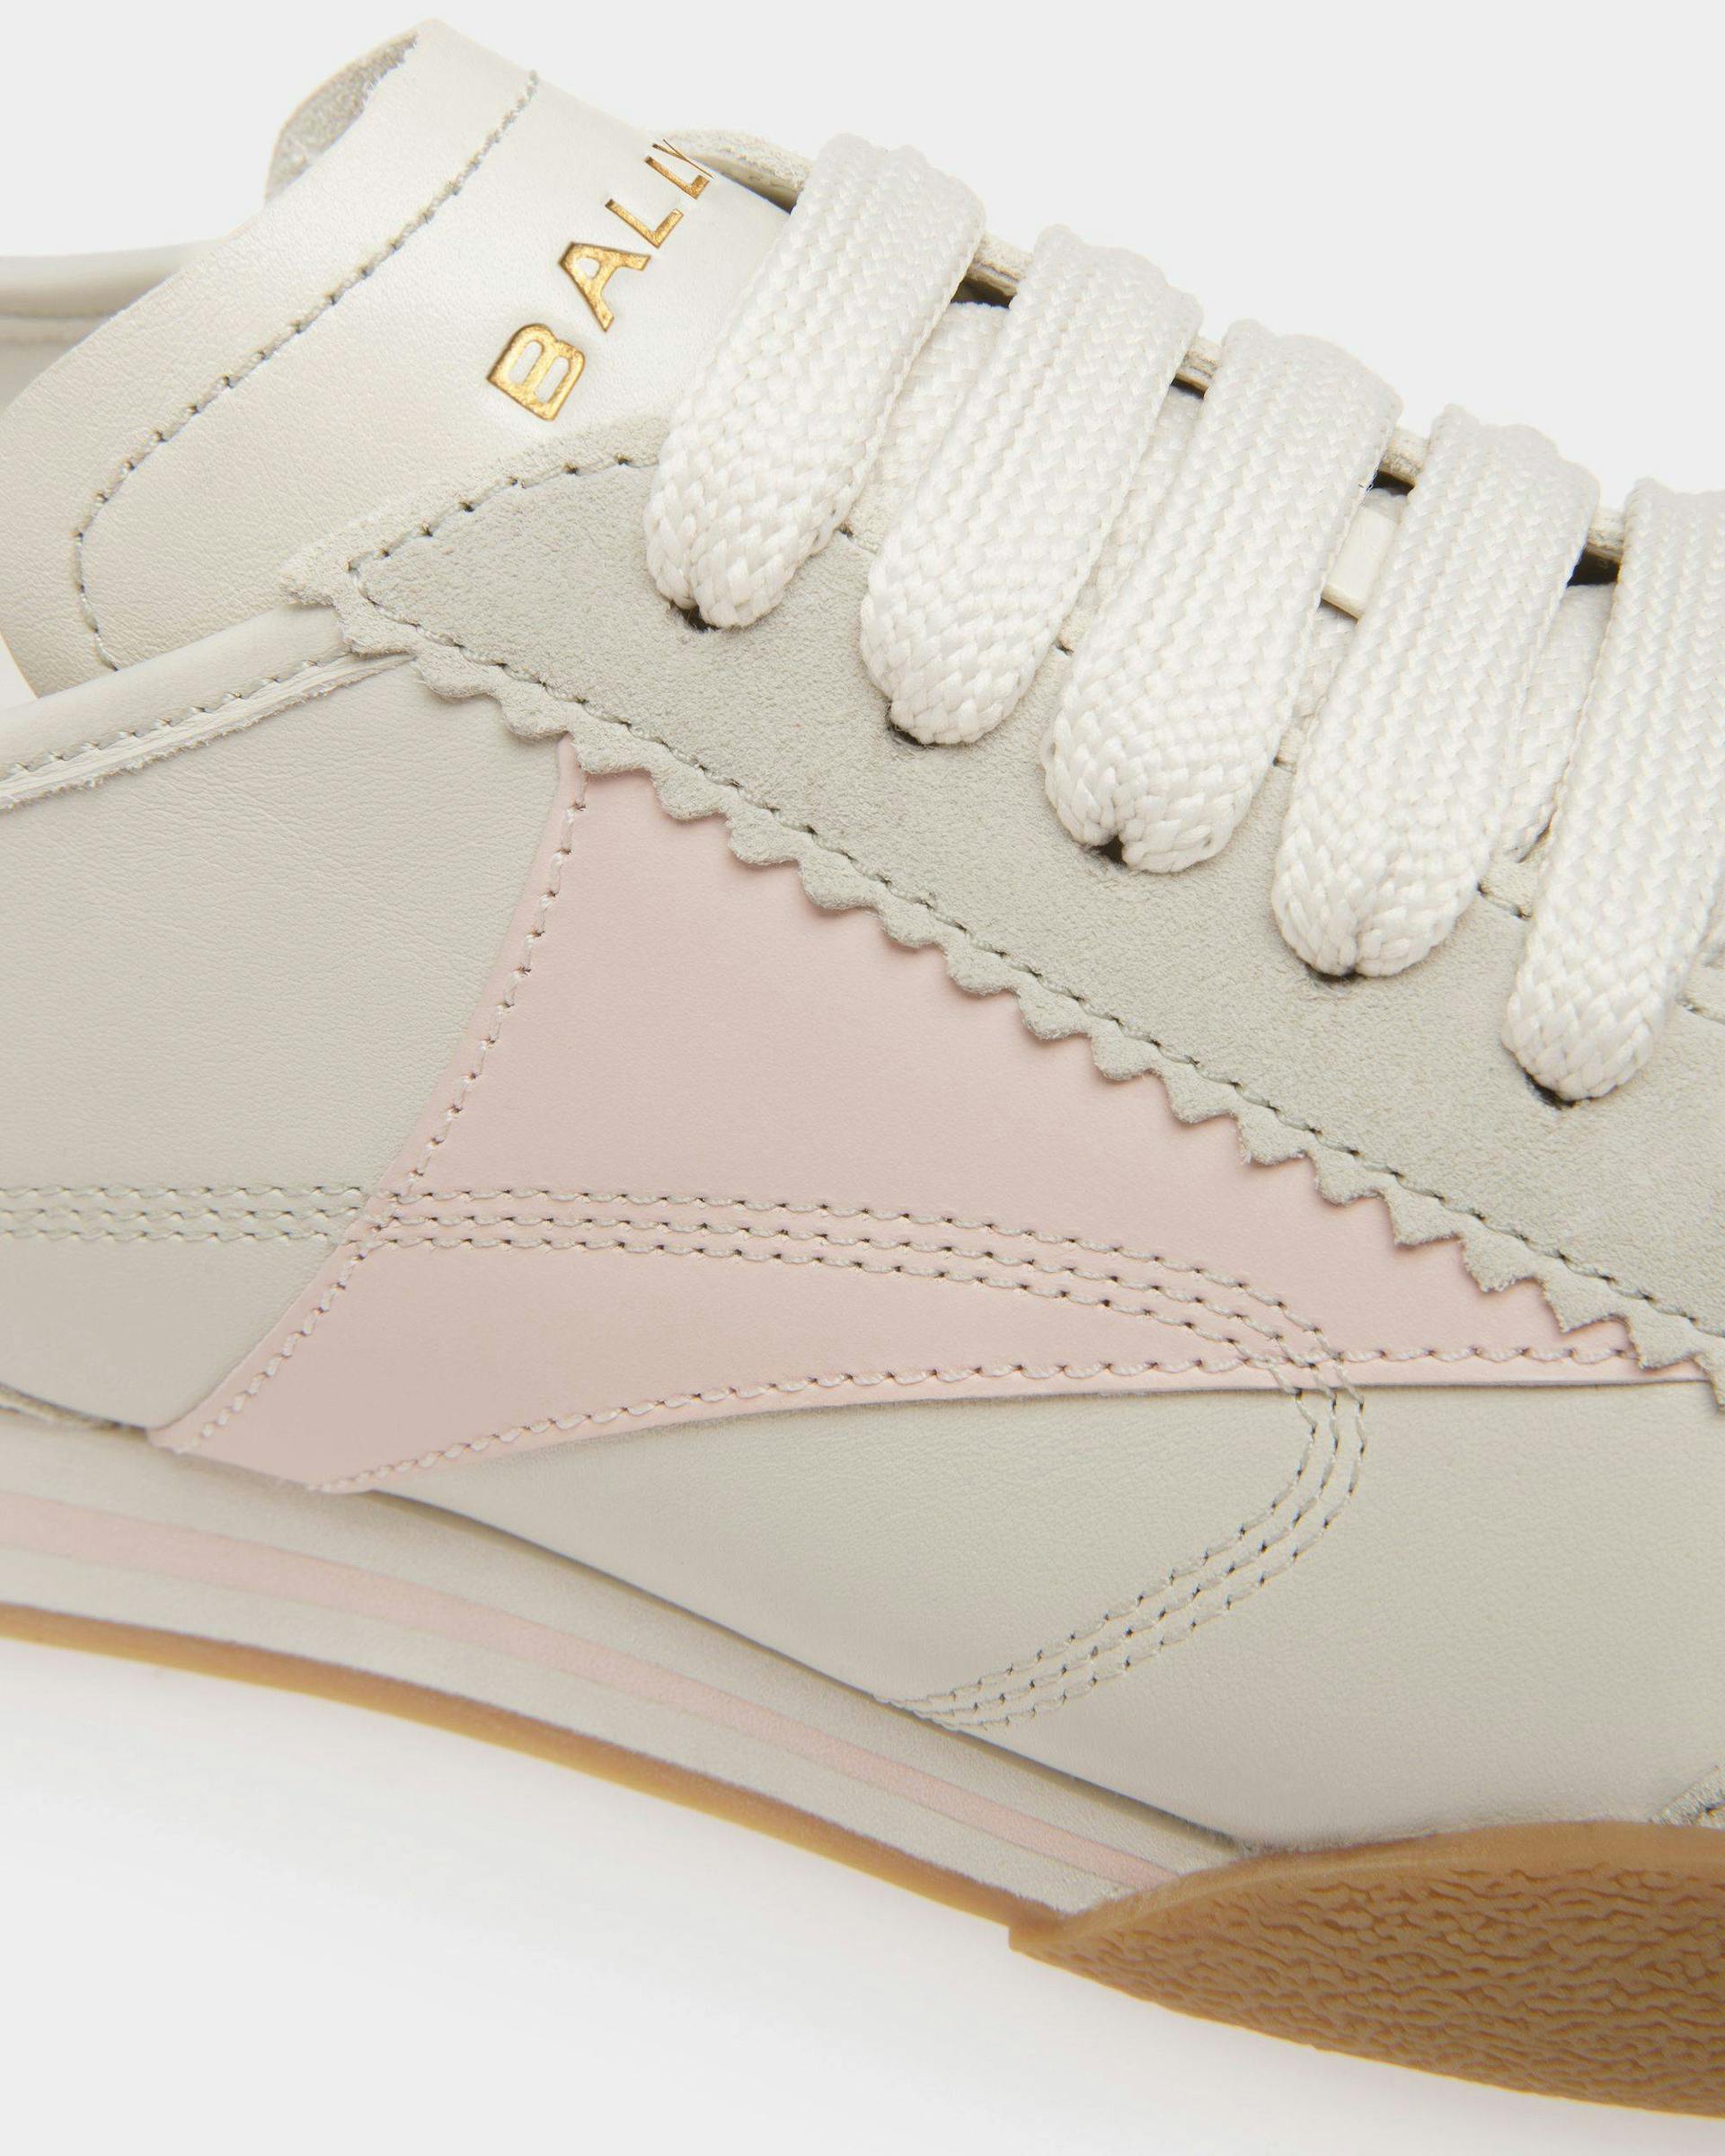 Women's Sussex Sneakers In Dusty White And Rose Leather | Bally | Still Life Detail